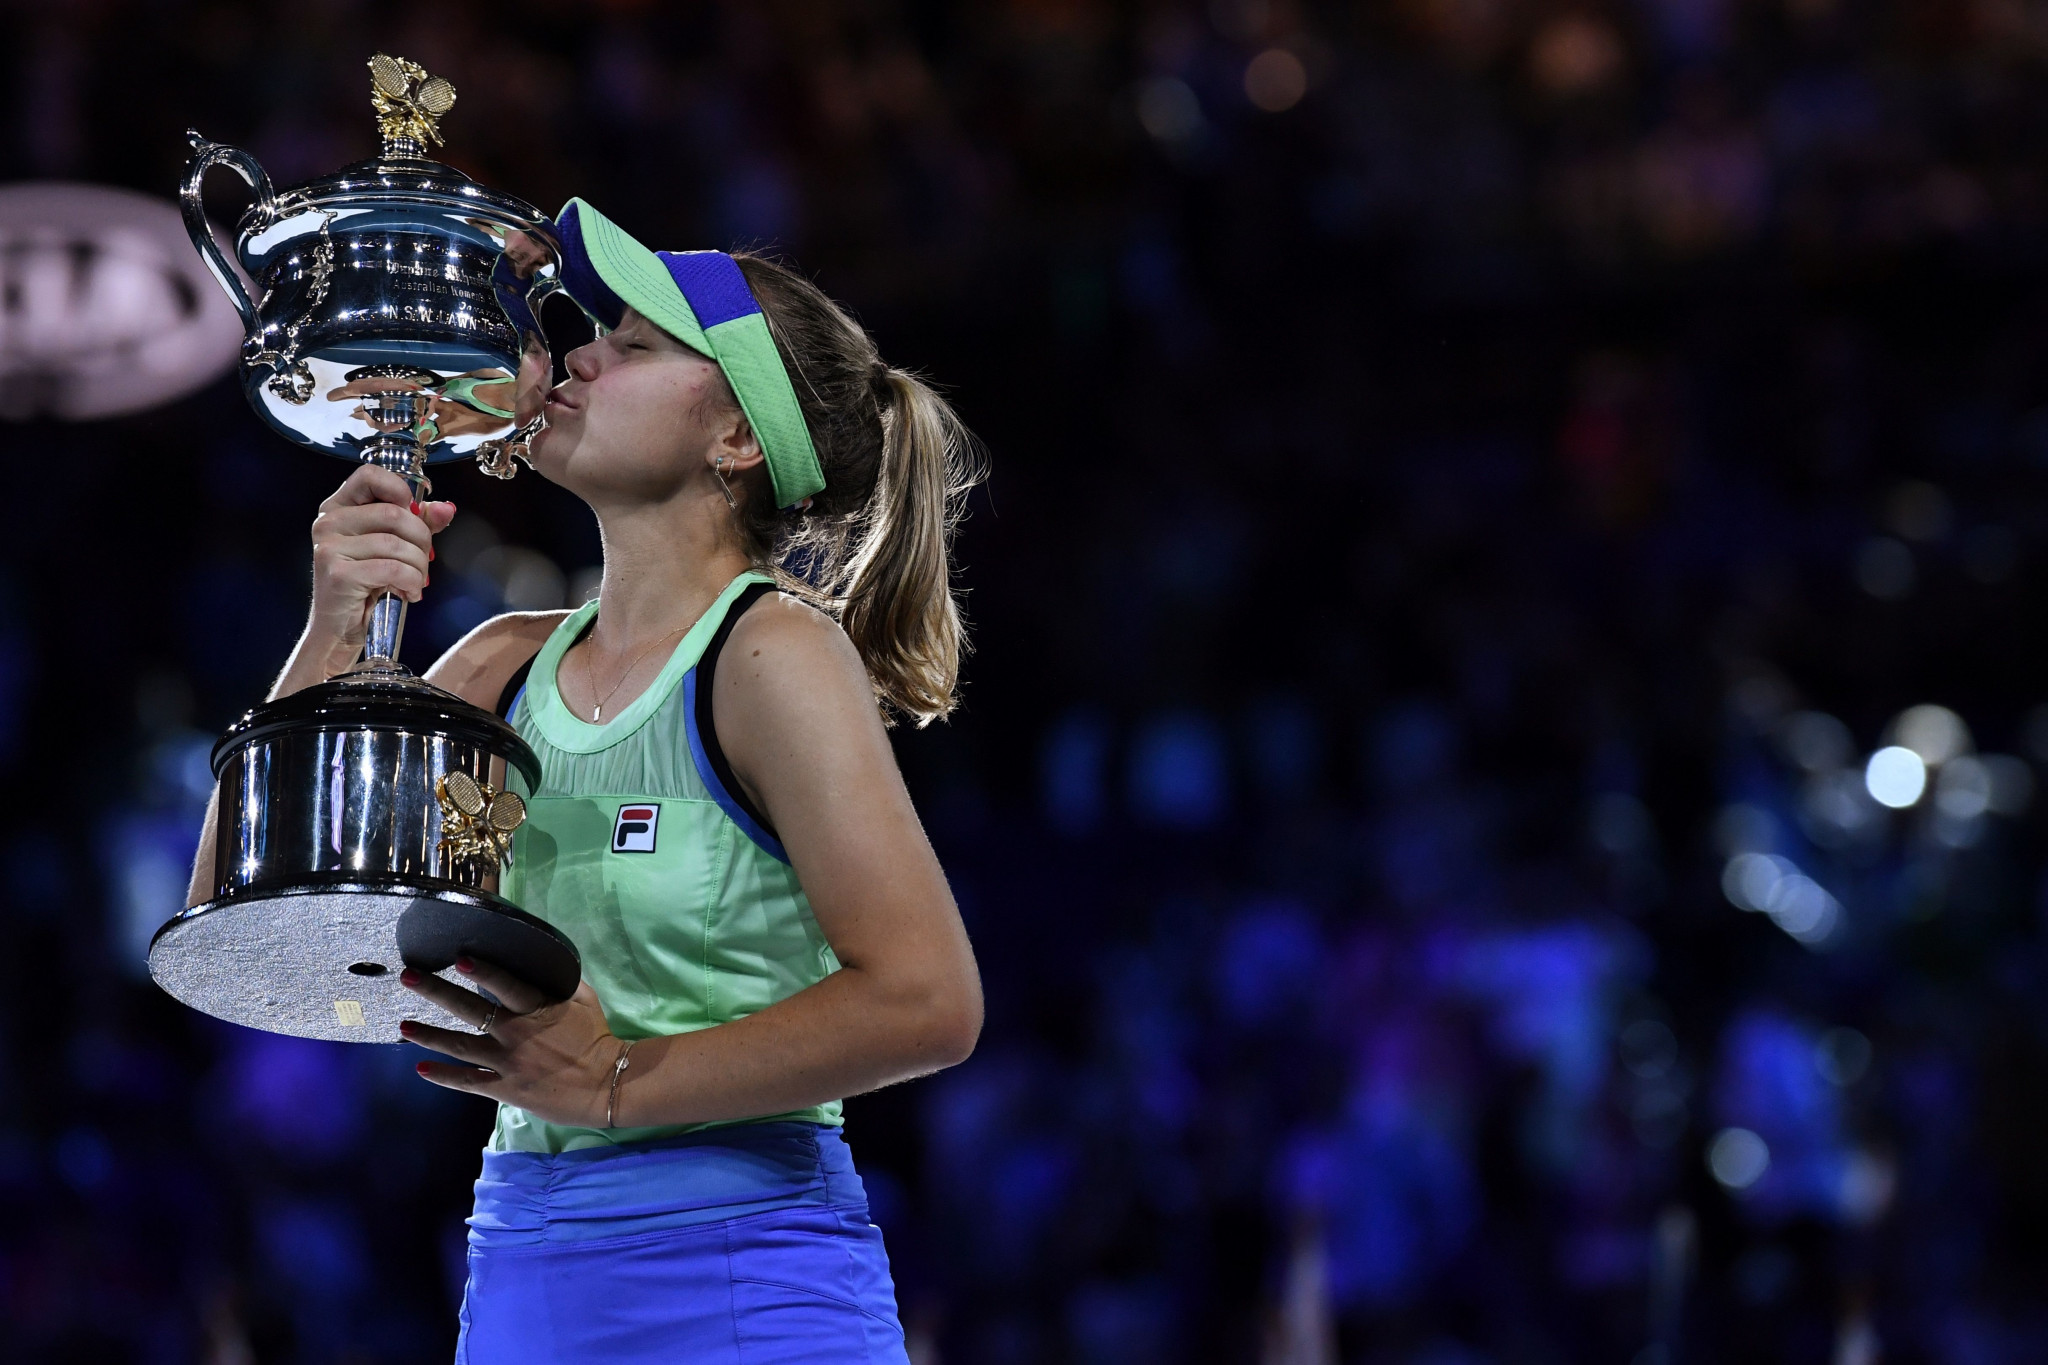 Tennis player Sofia Kenin has been nominated for a Team USA Award after winning the Australian Open ©Getty Images